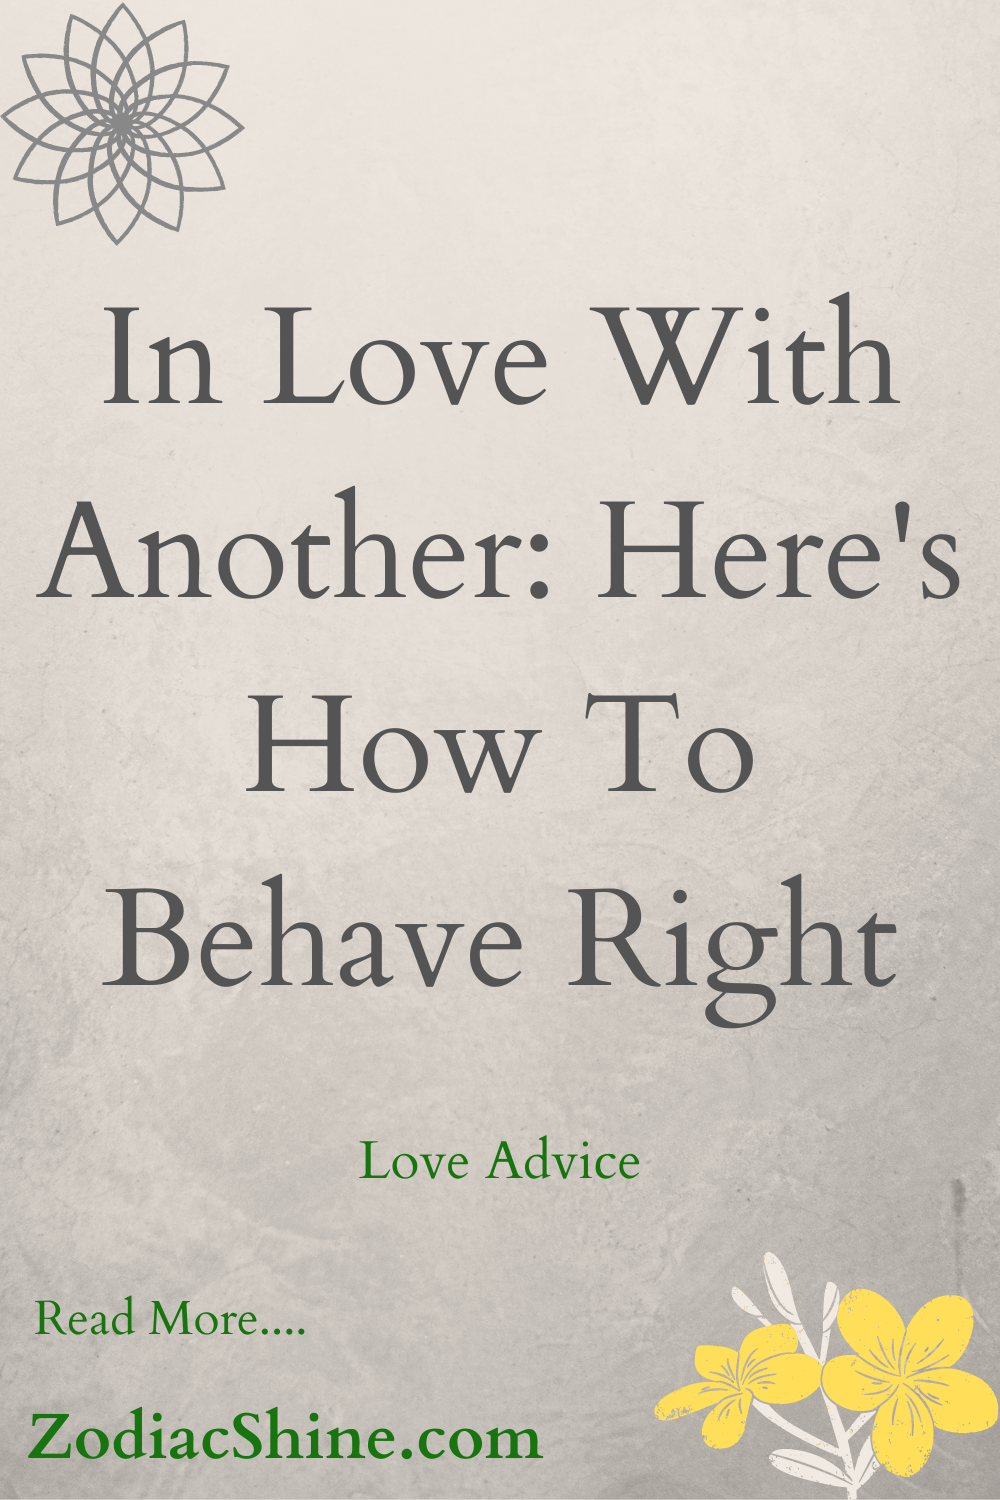 In Love With Another: Here's How To Behave Right